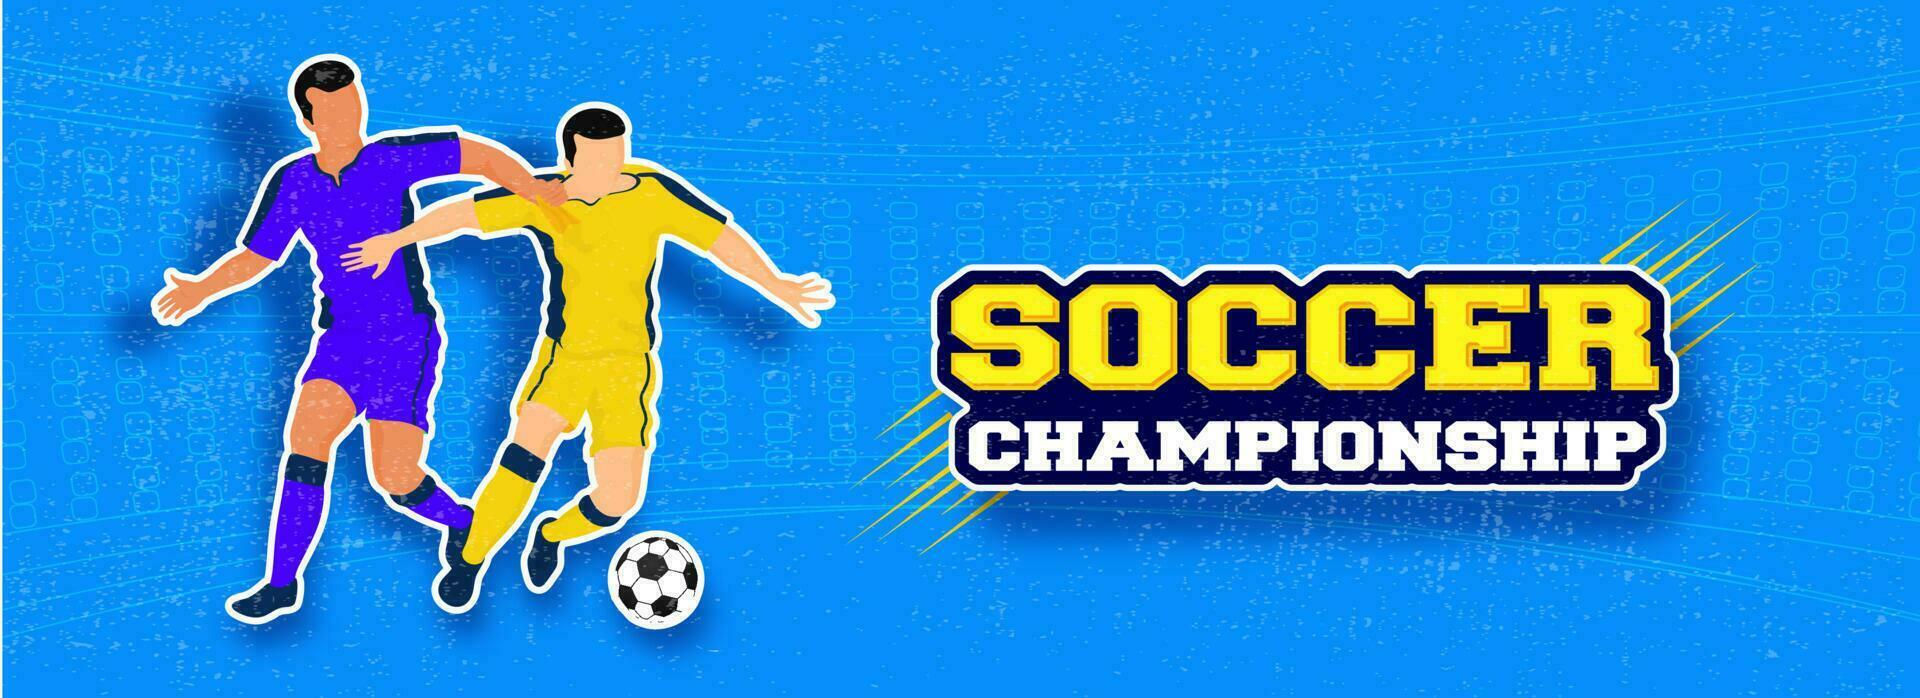 Soccer Championship text with footballers character in sticker style on blue background. Can be used as header or banner design. vector